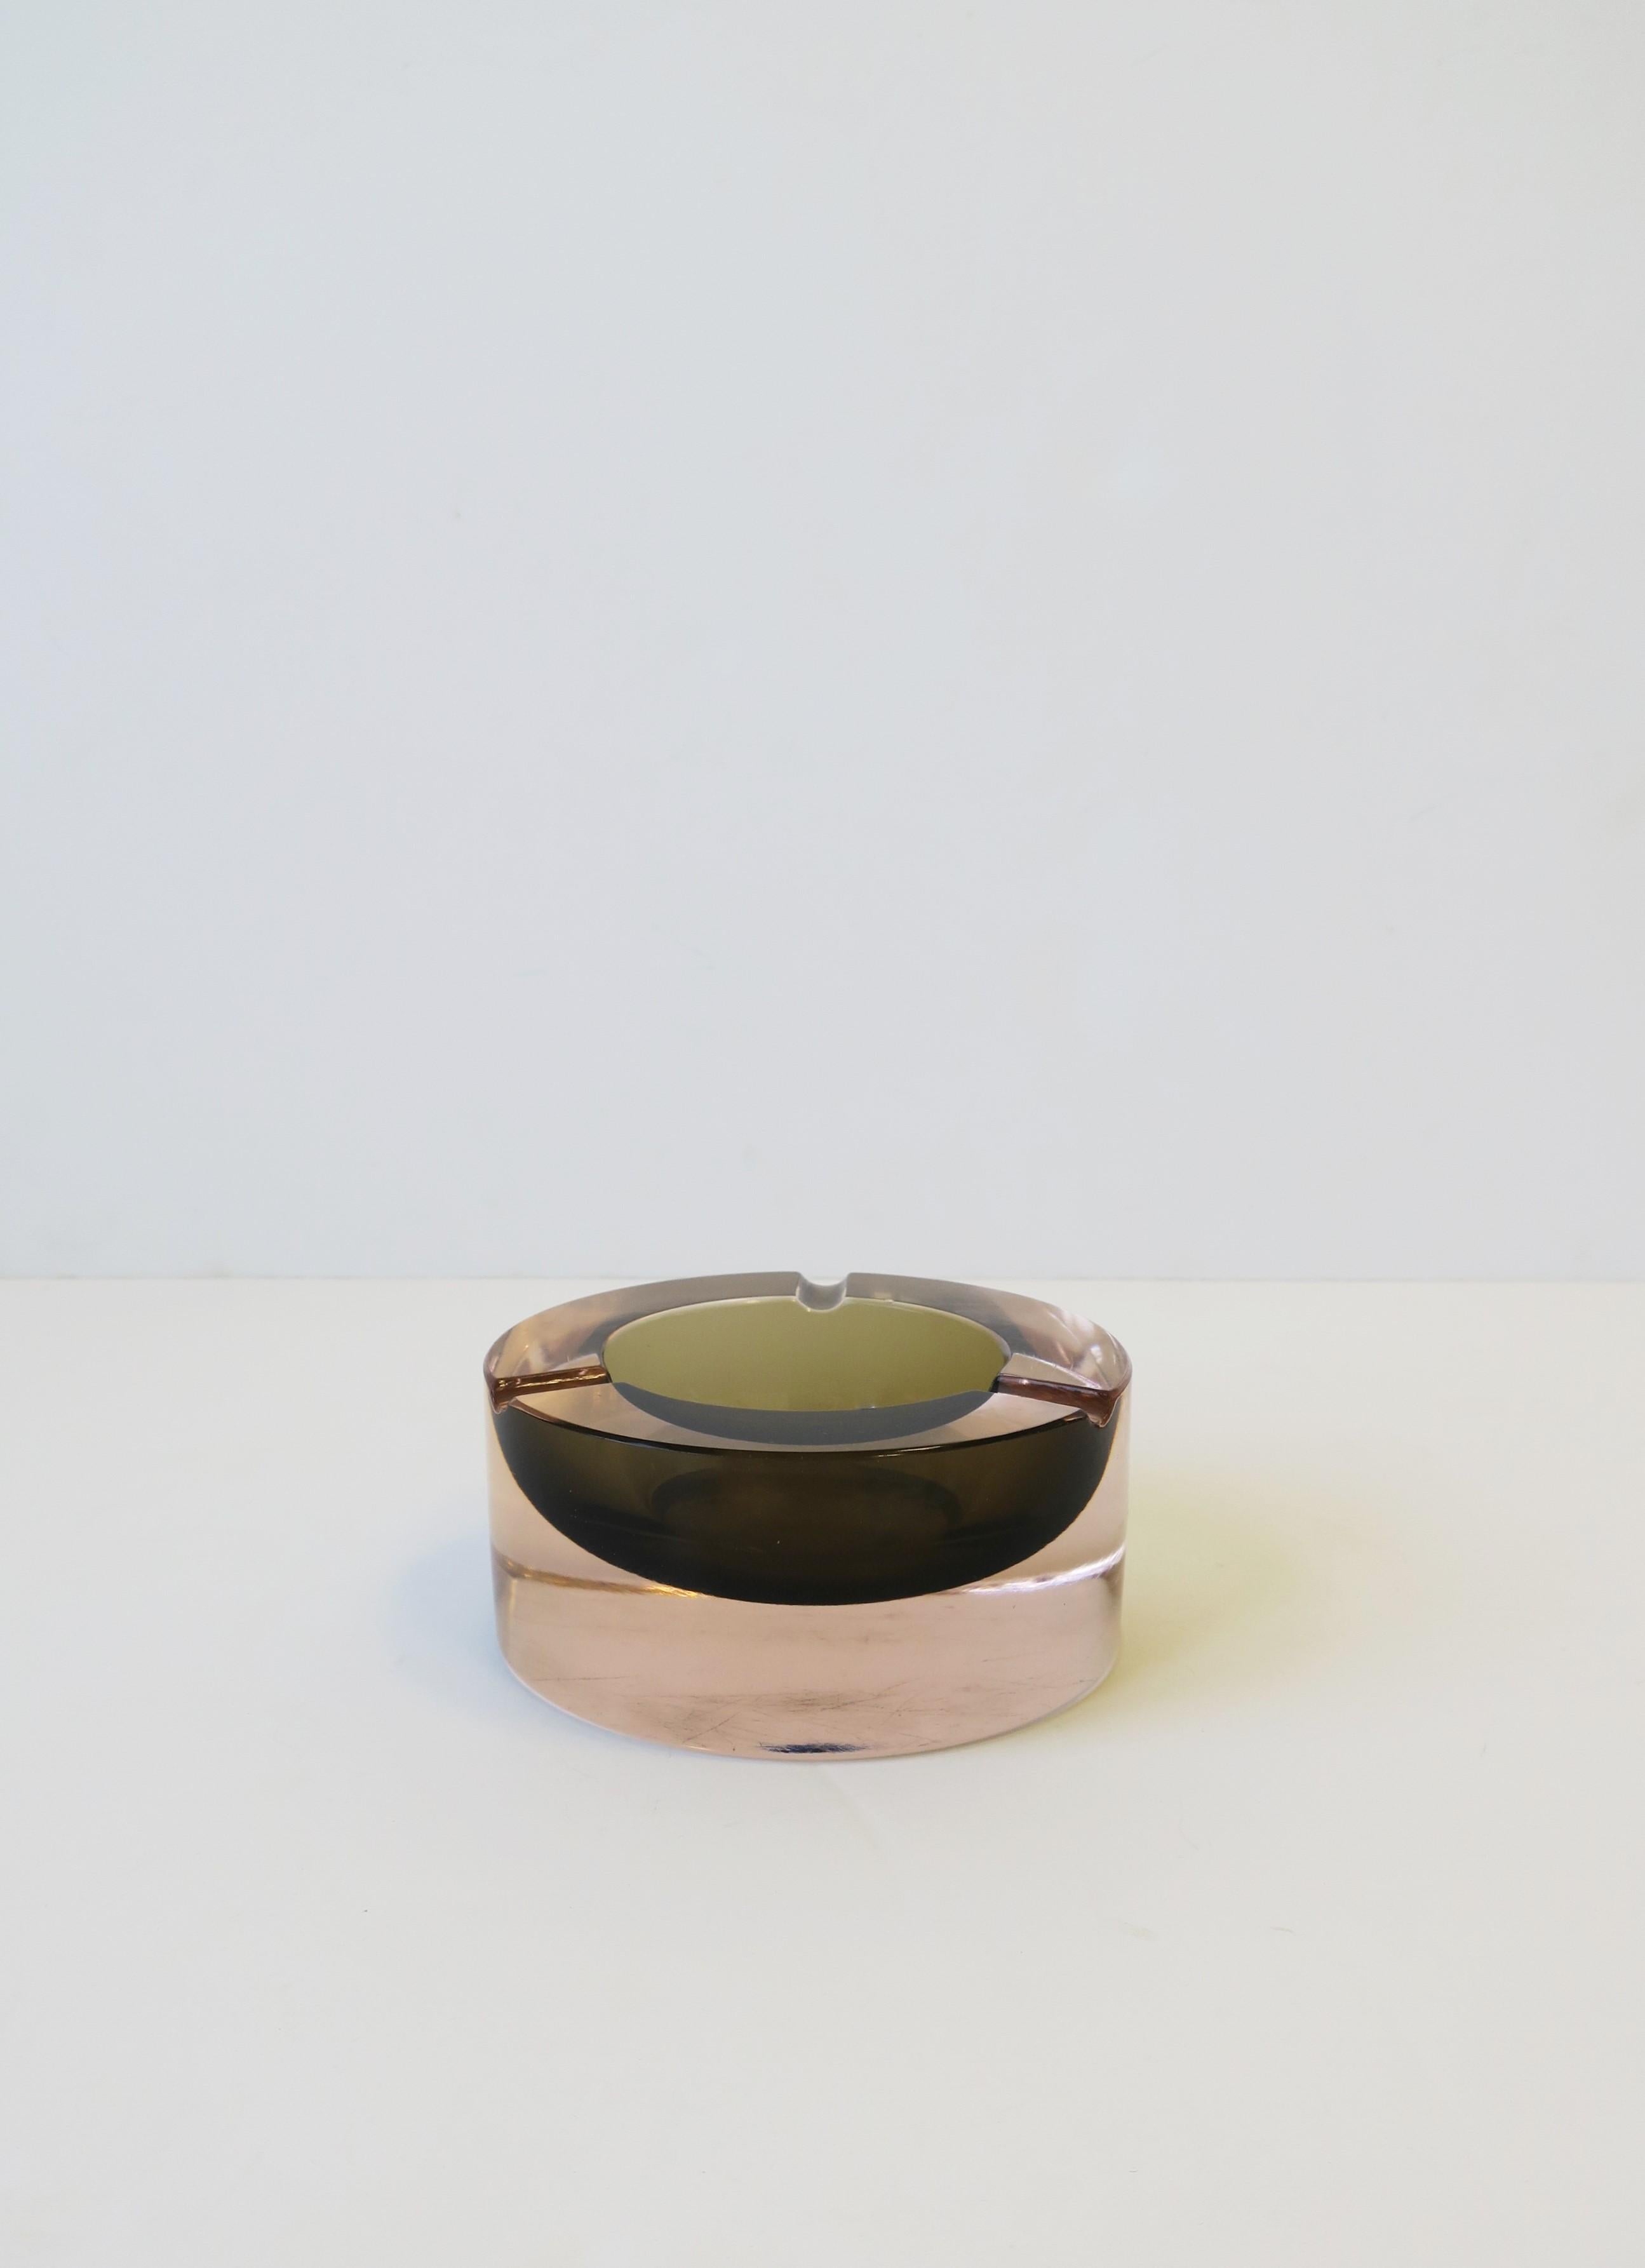 A substantial and stunning Modern Italian Murano Sommerso art glass bowl or ashtray in rose pink and smoked grey/taupe hues, in the style of designer Seguso, circa 20th century, Italy. Piece appears to have never been used as an ashtray. Measures: